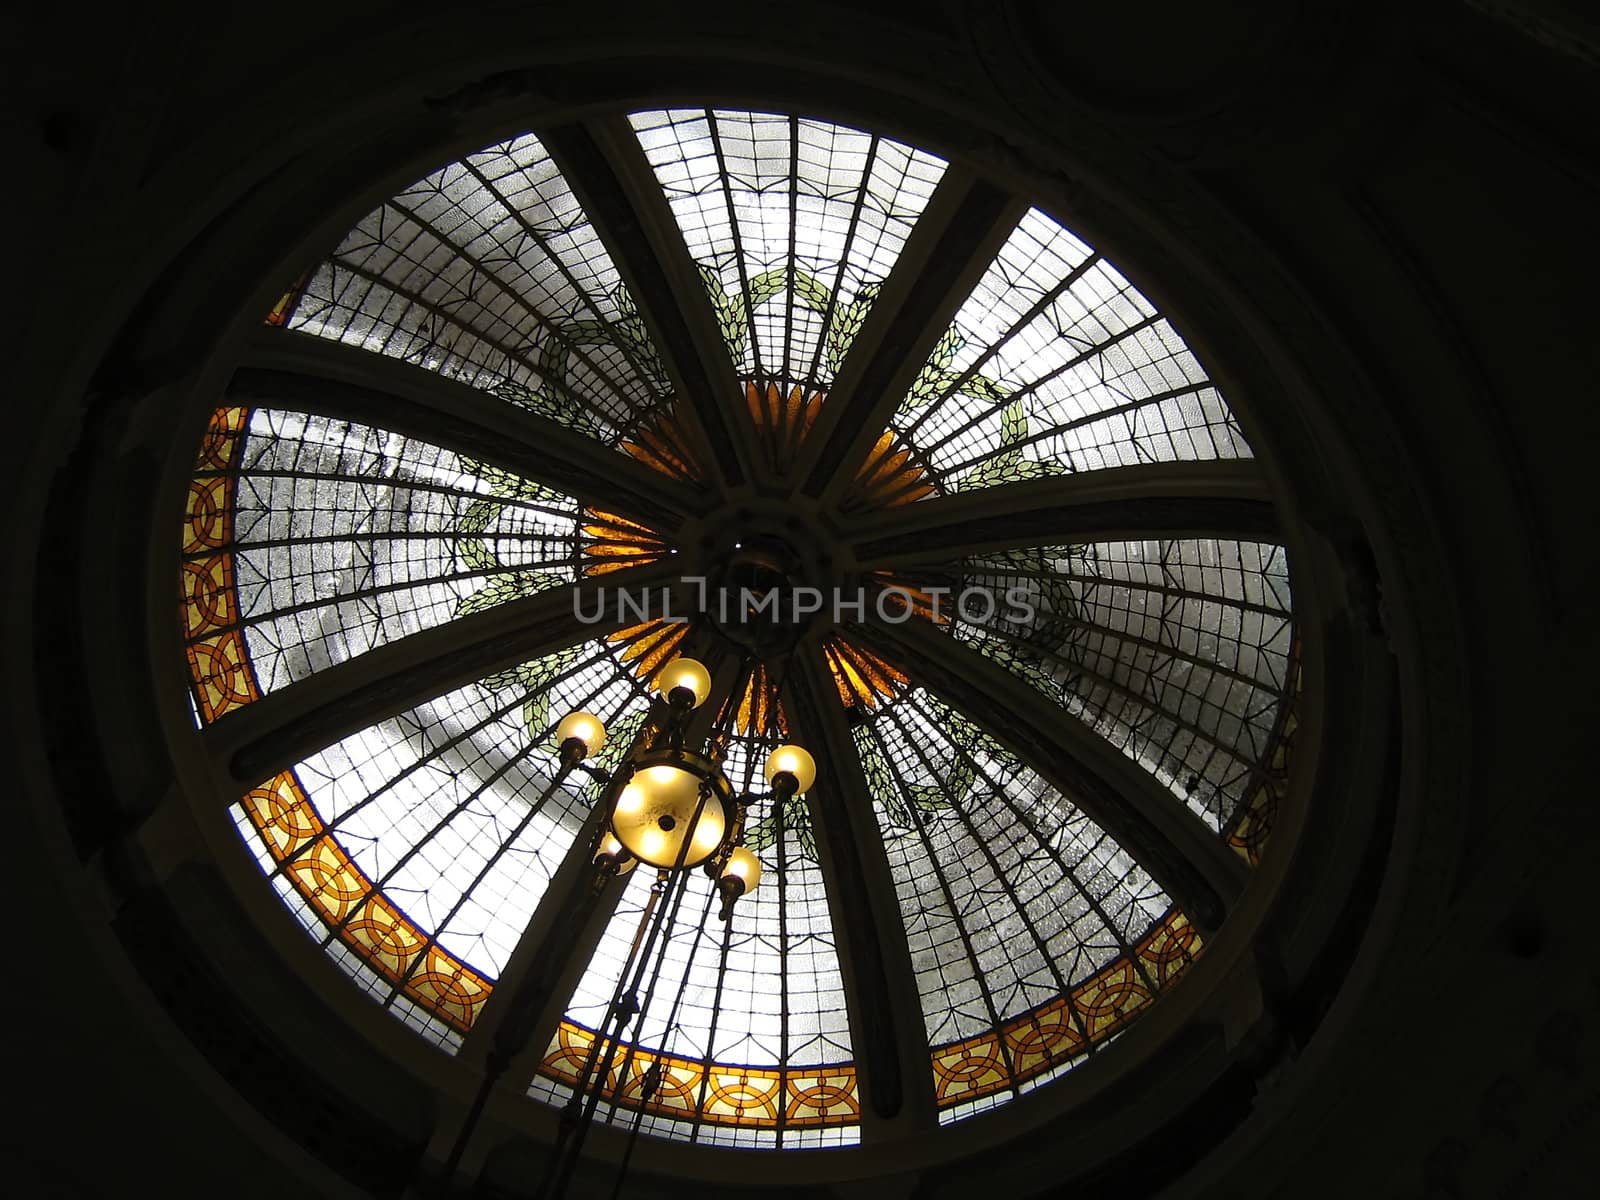 A photograph of a stained glass window inside the dome of a church.